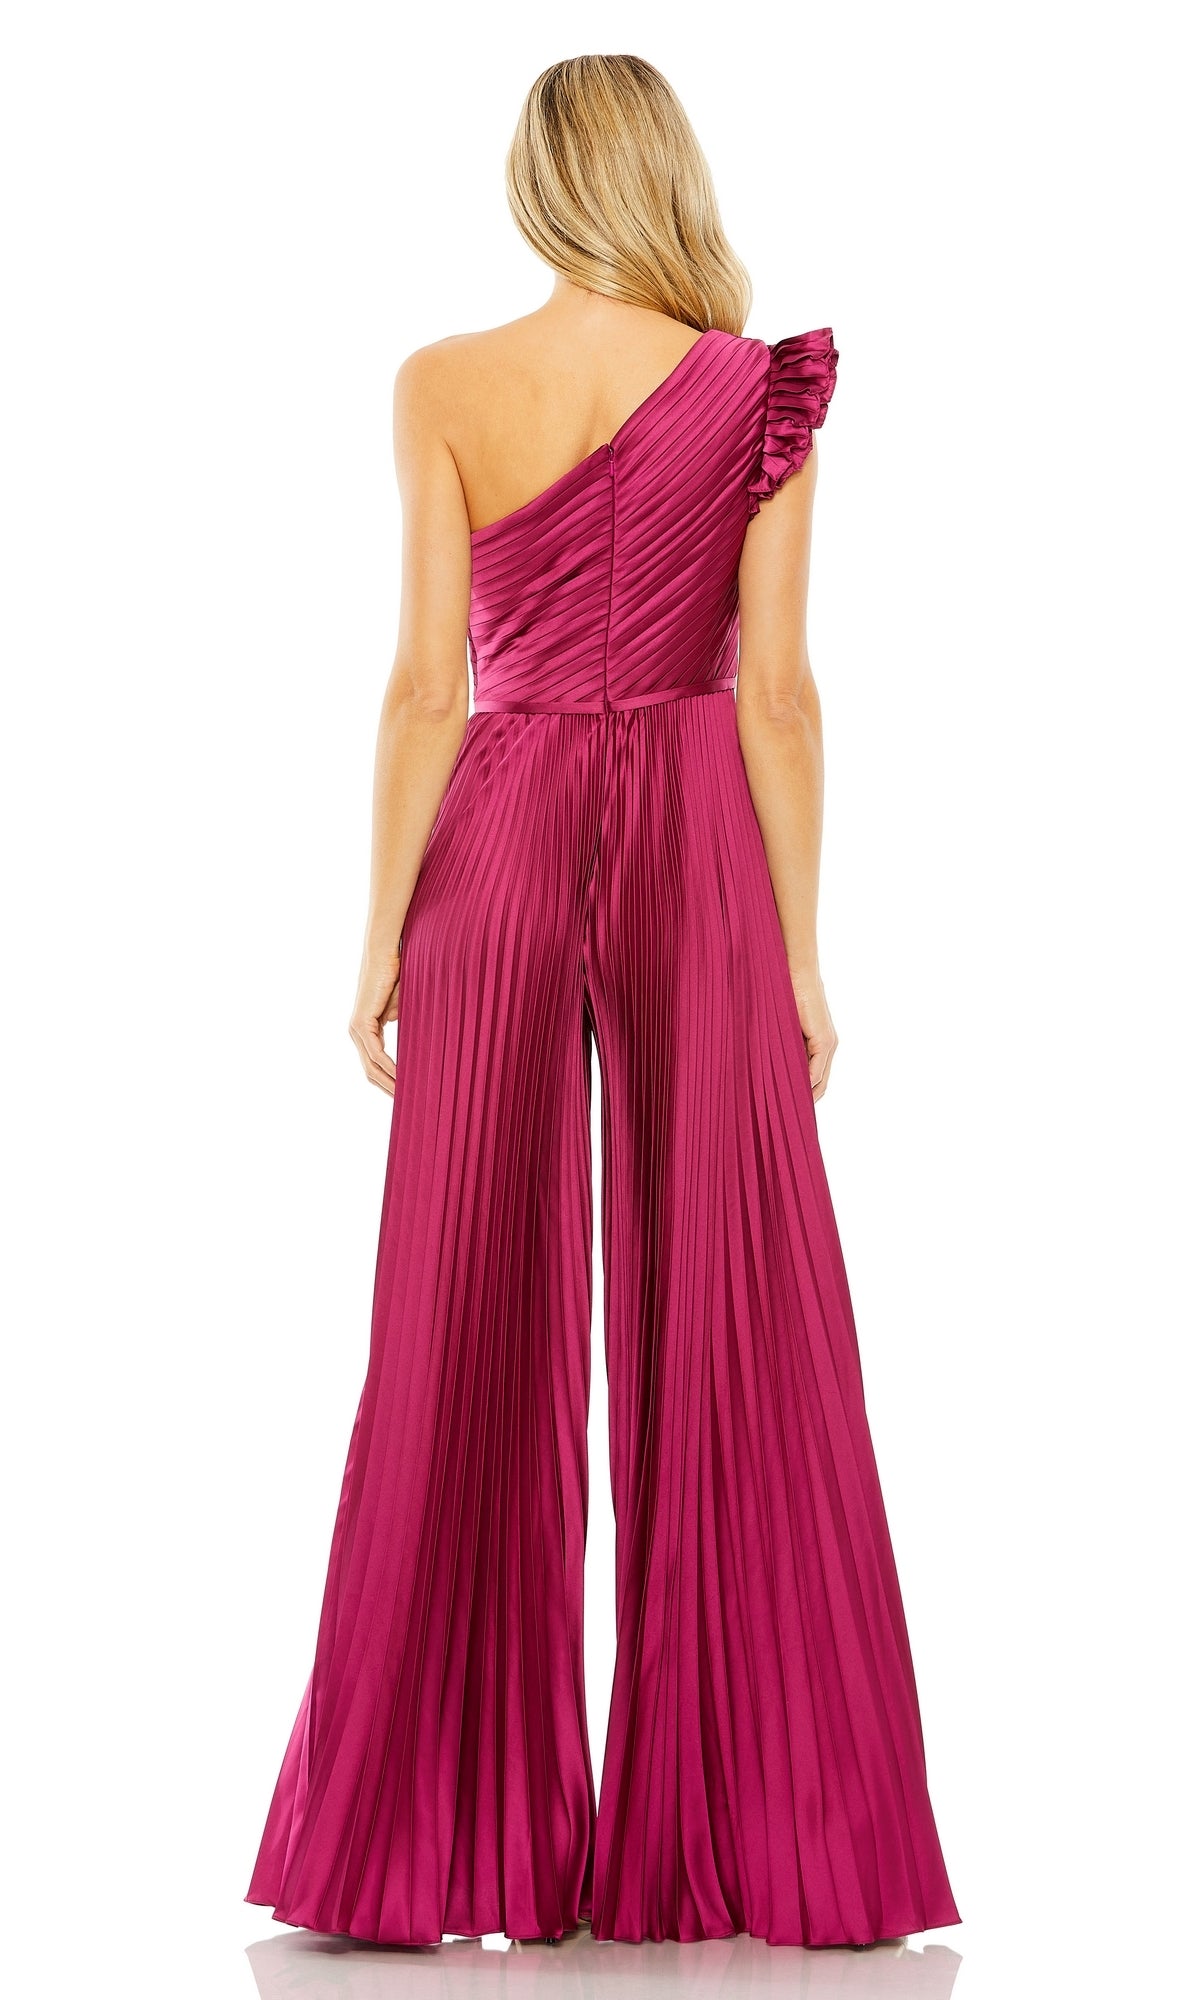 Berry Pink Formal Jumpsuit 27458 by Mac Duggal